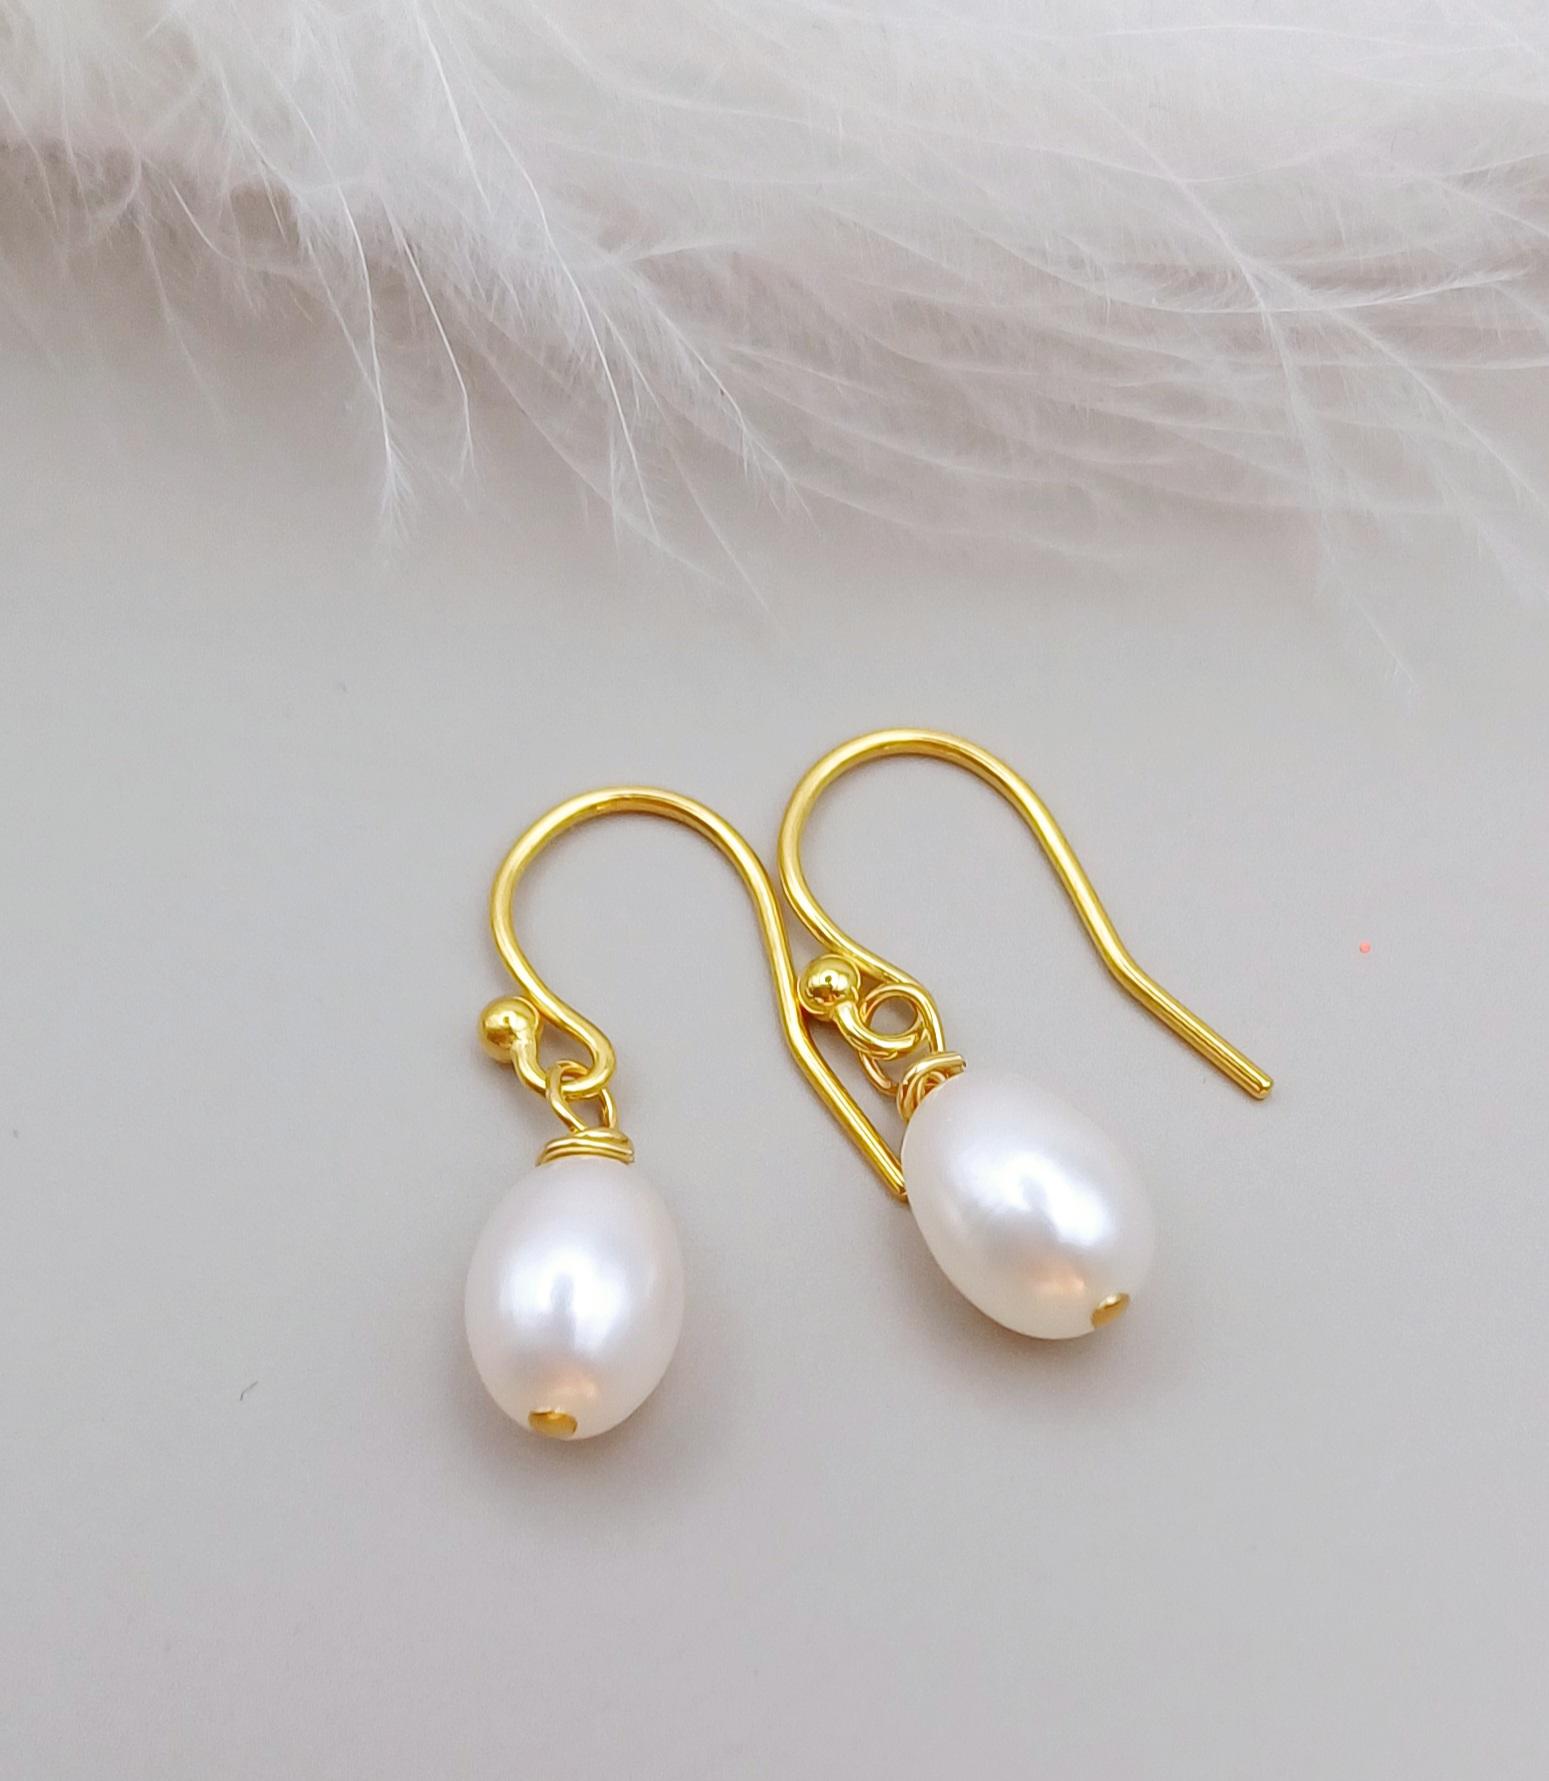 Gold vermeil hook ear wires with freshwater ivory pearls.